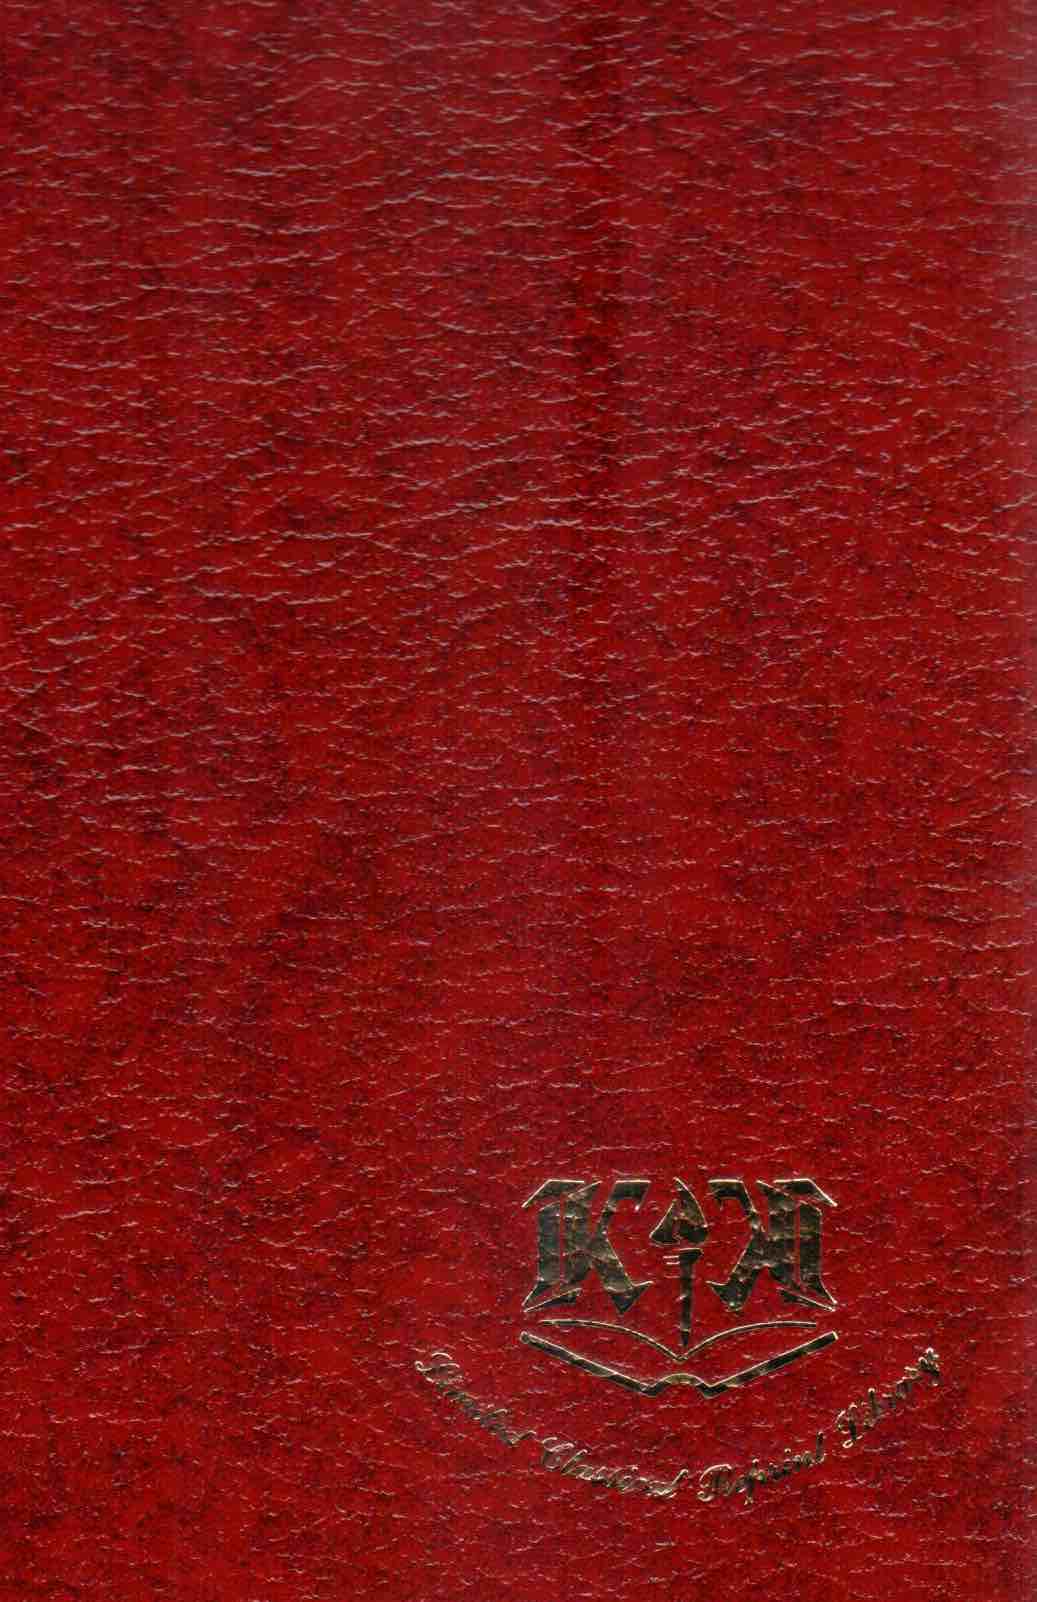 Cover of The Epistle to the Hebrews